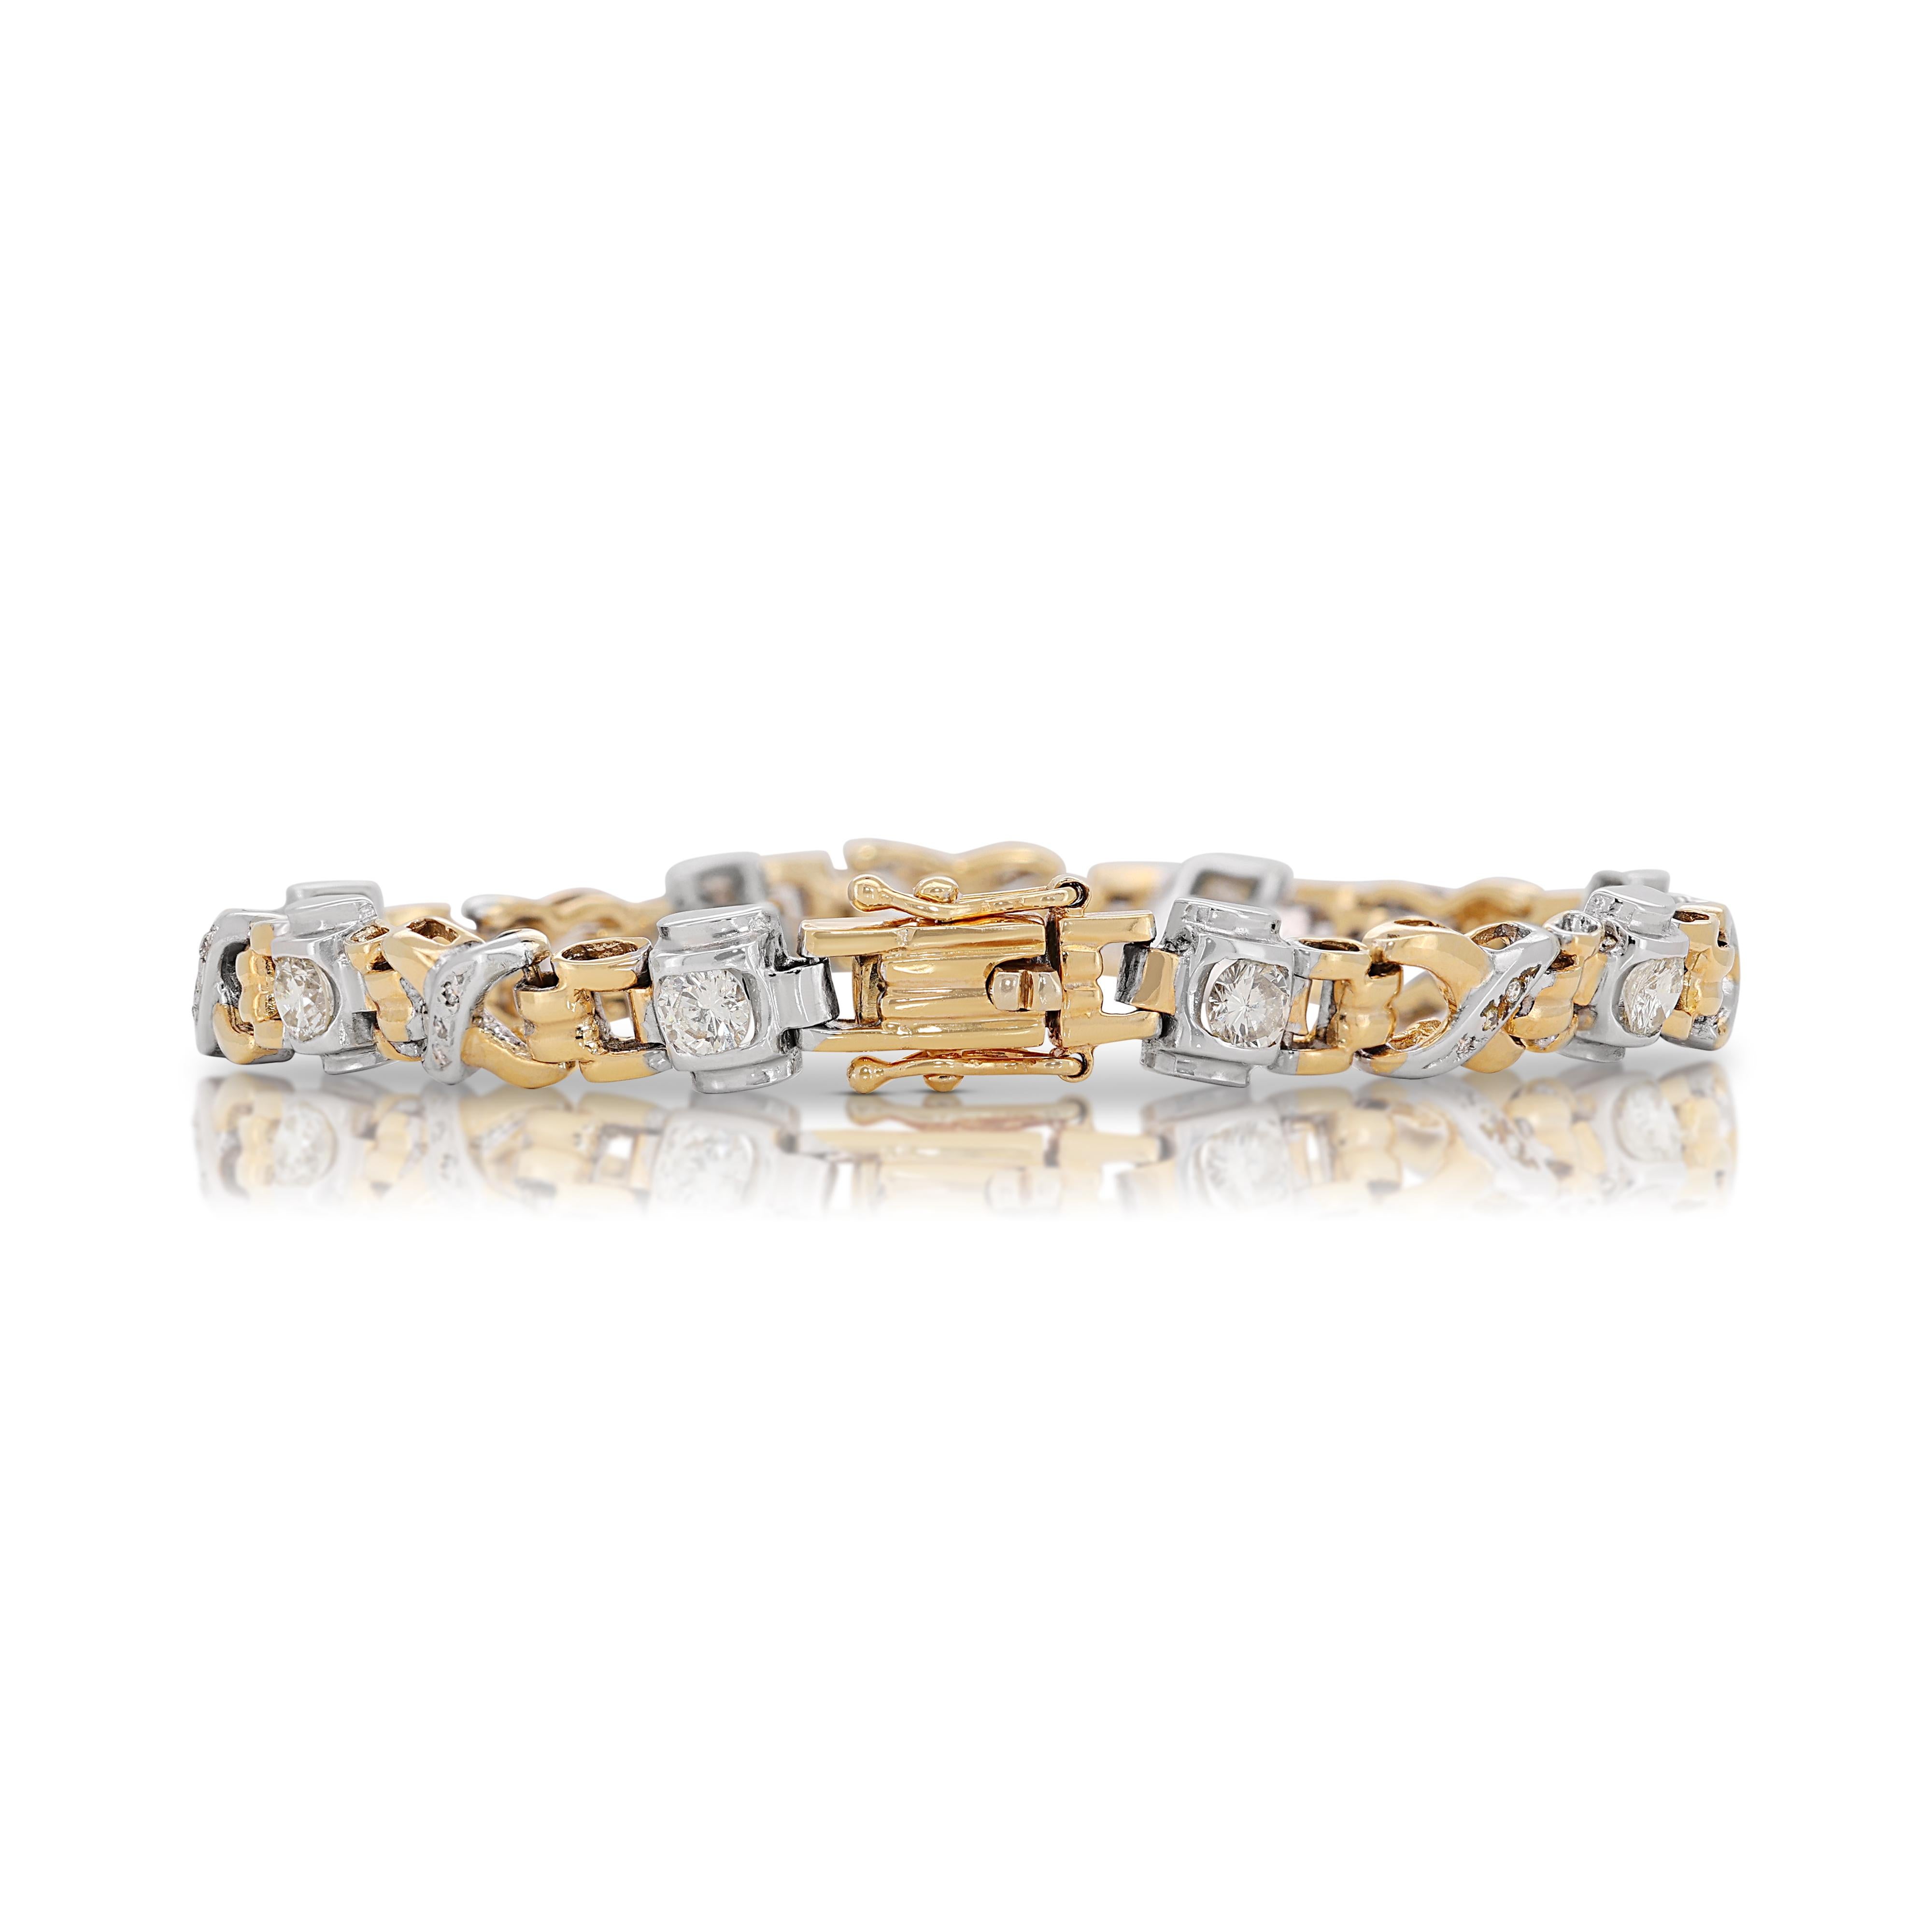 Exquisite 1.44ct Diamonds Bracelet in 18K White and Yellow Gold For Sale 2